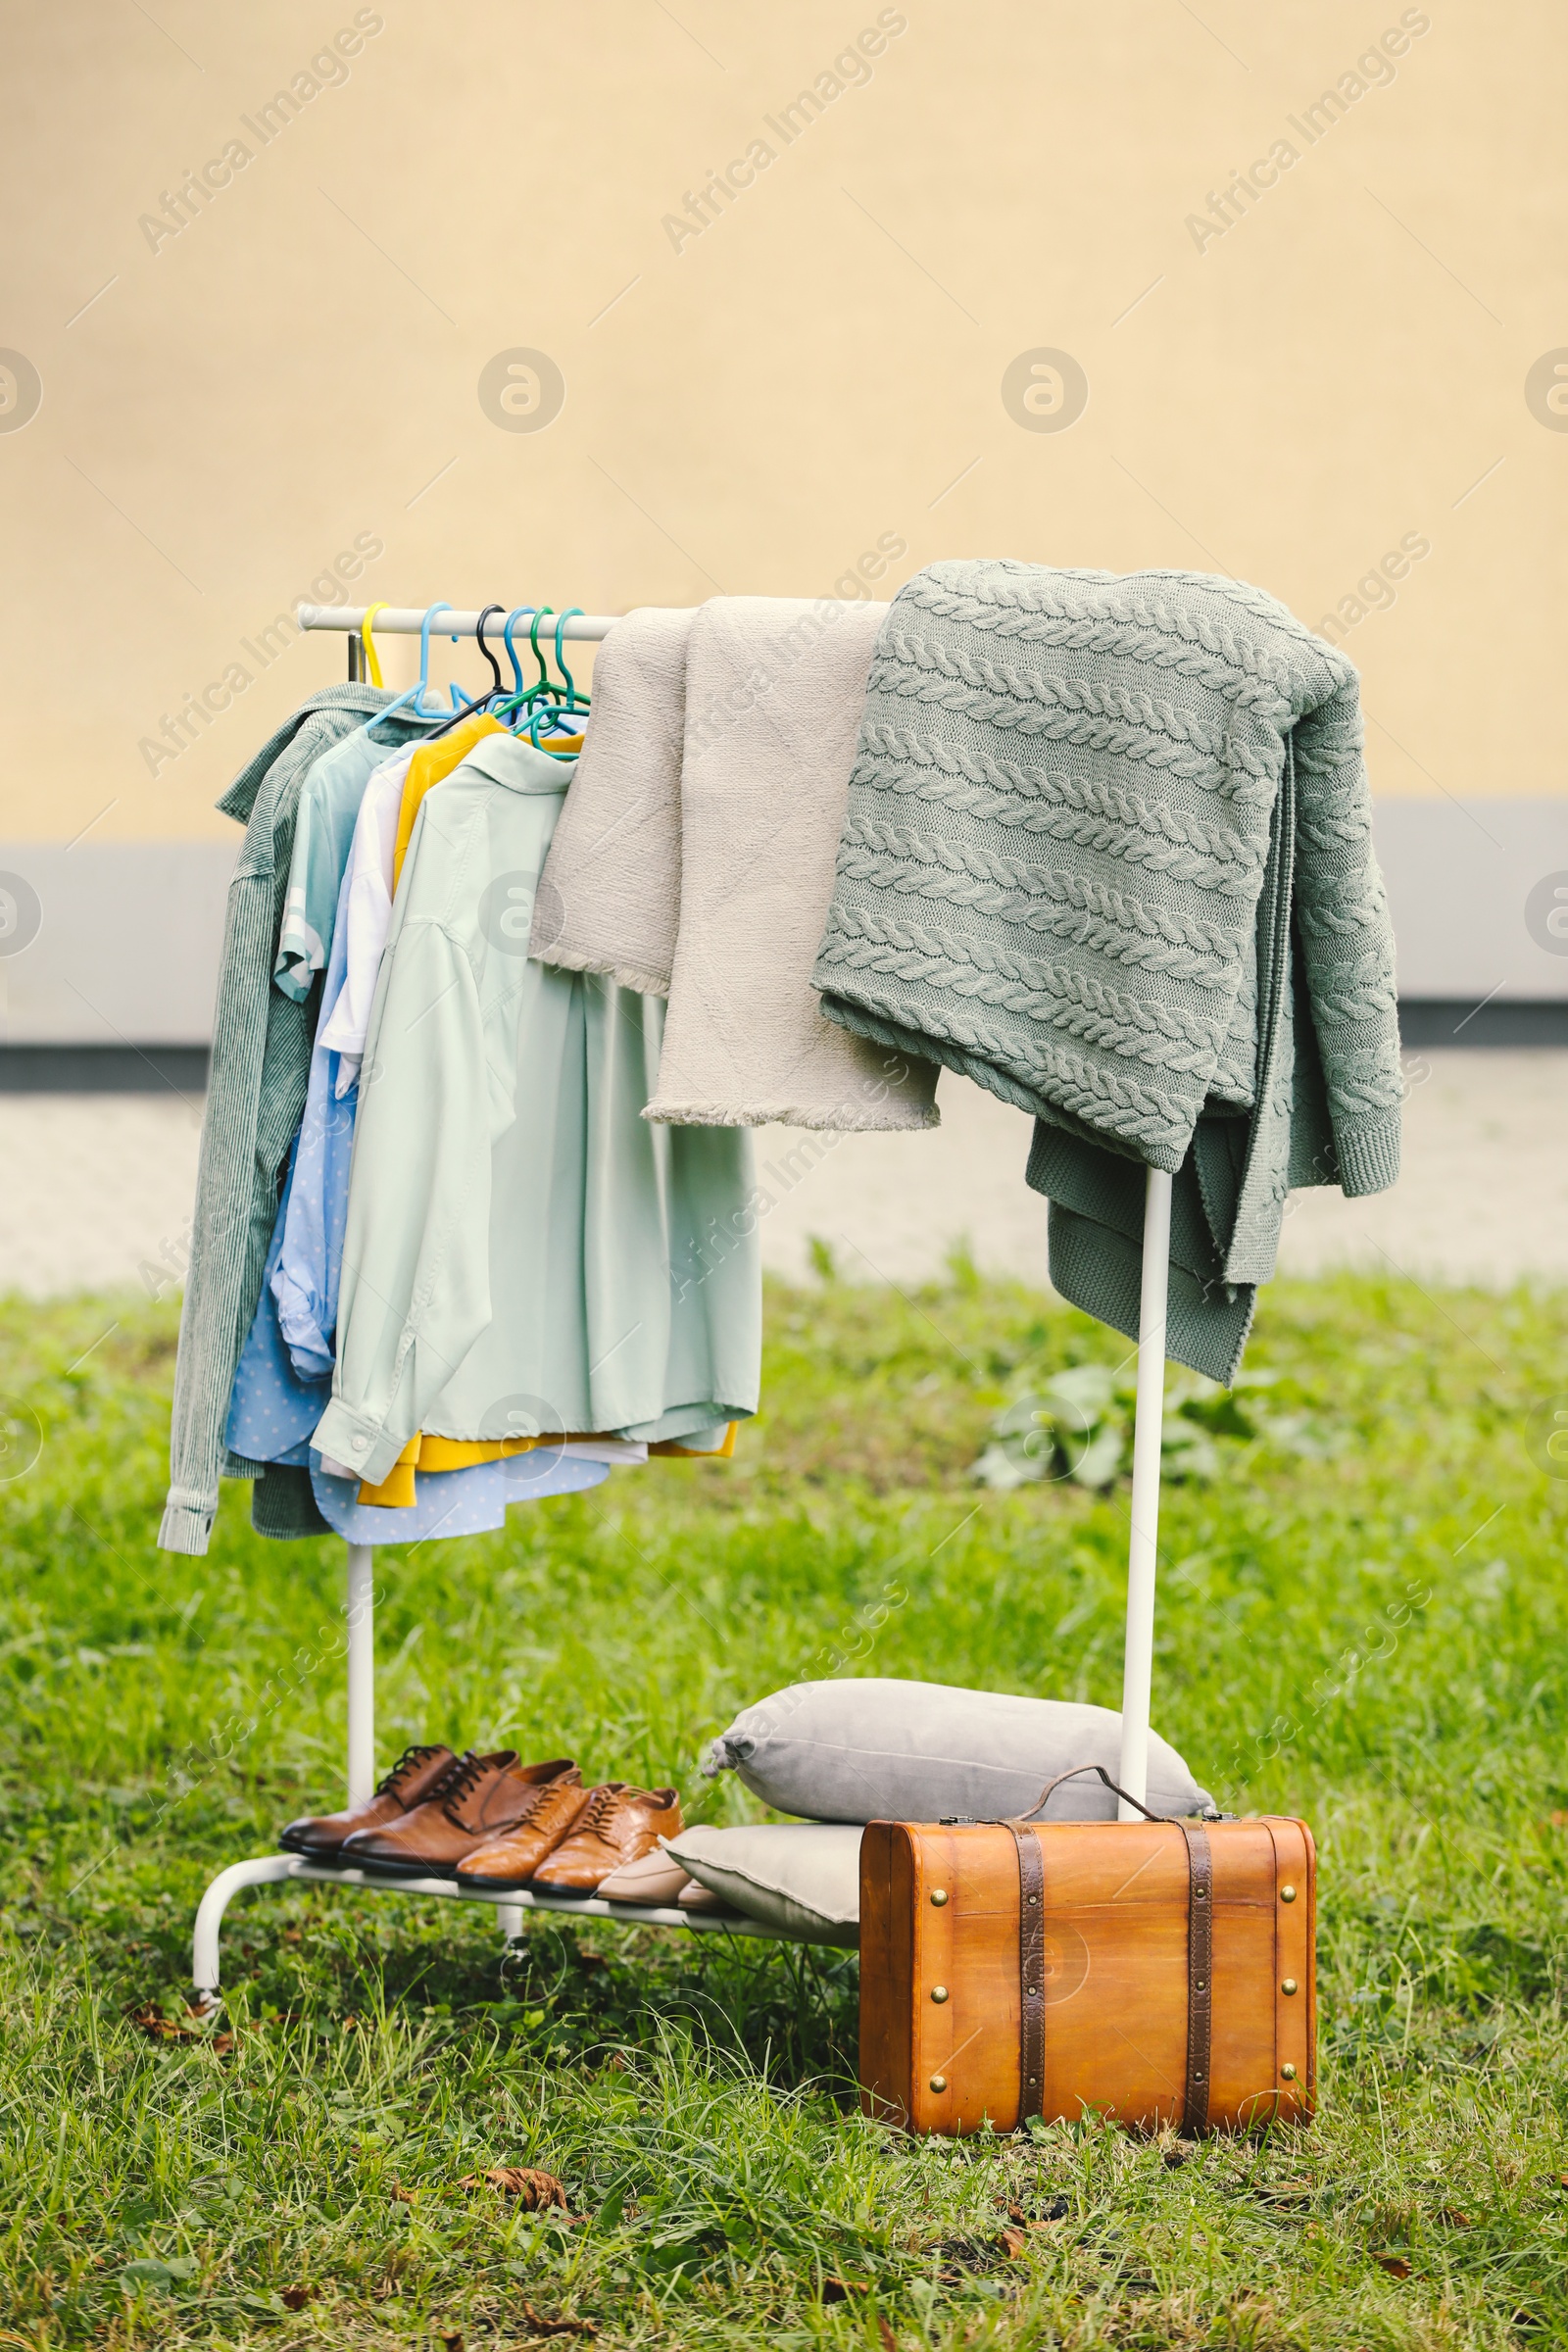 Photo of Clothing rack with different garments in yard. Garage sale